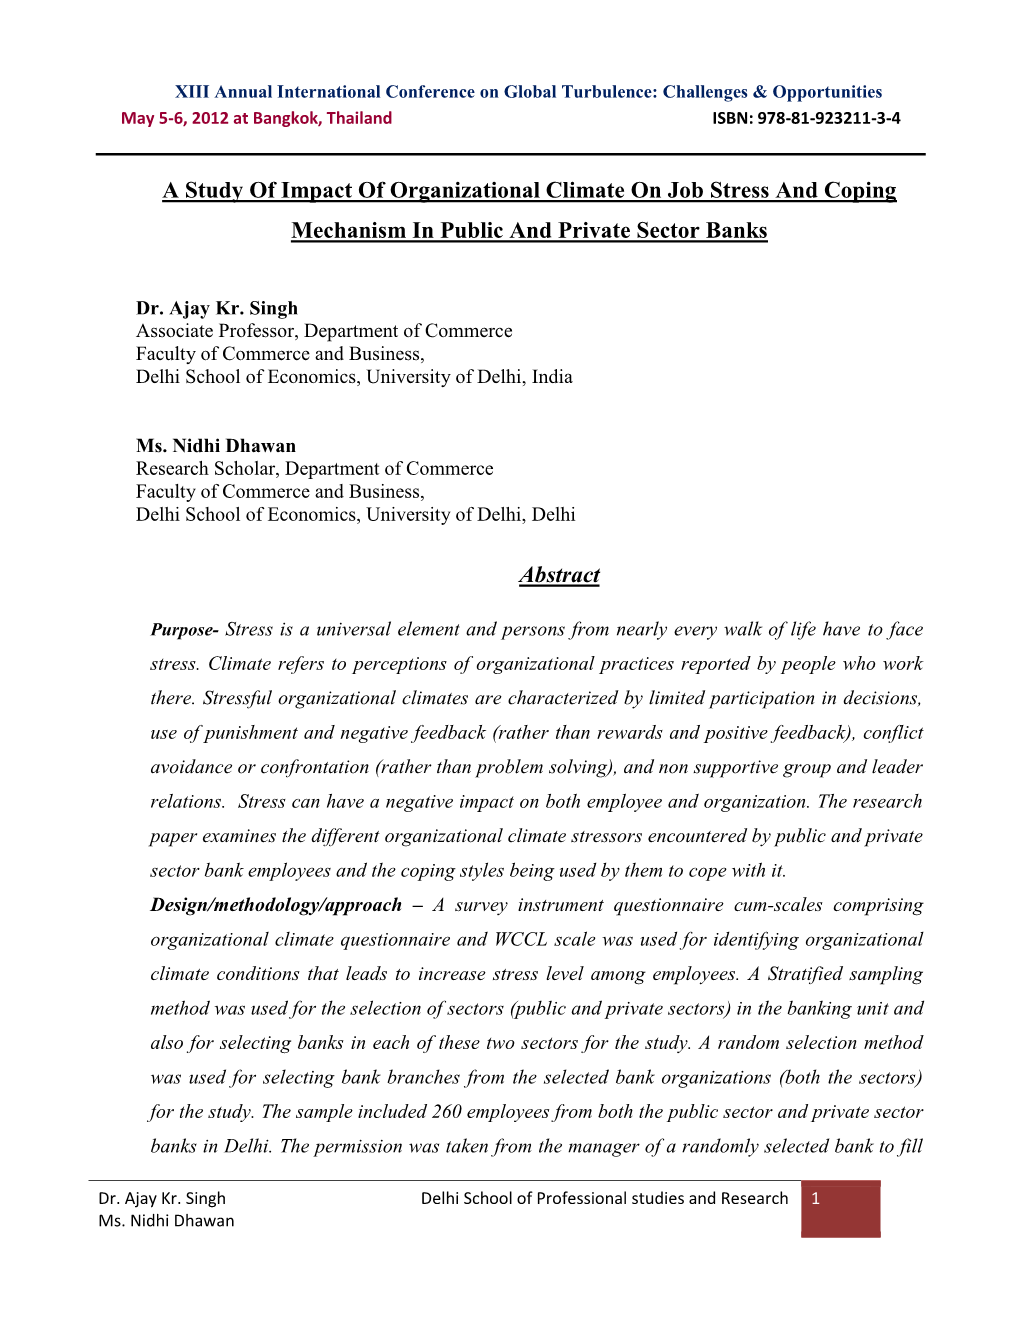 A Study of Impact of Organizational Climate on Job Stress and Coping Mechanism in Public and Private Sector Banks Abstract